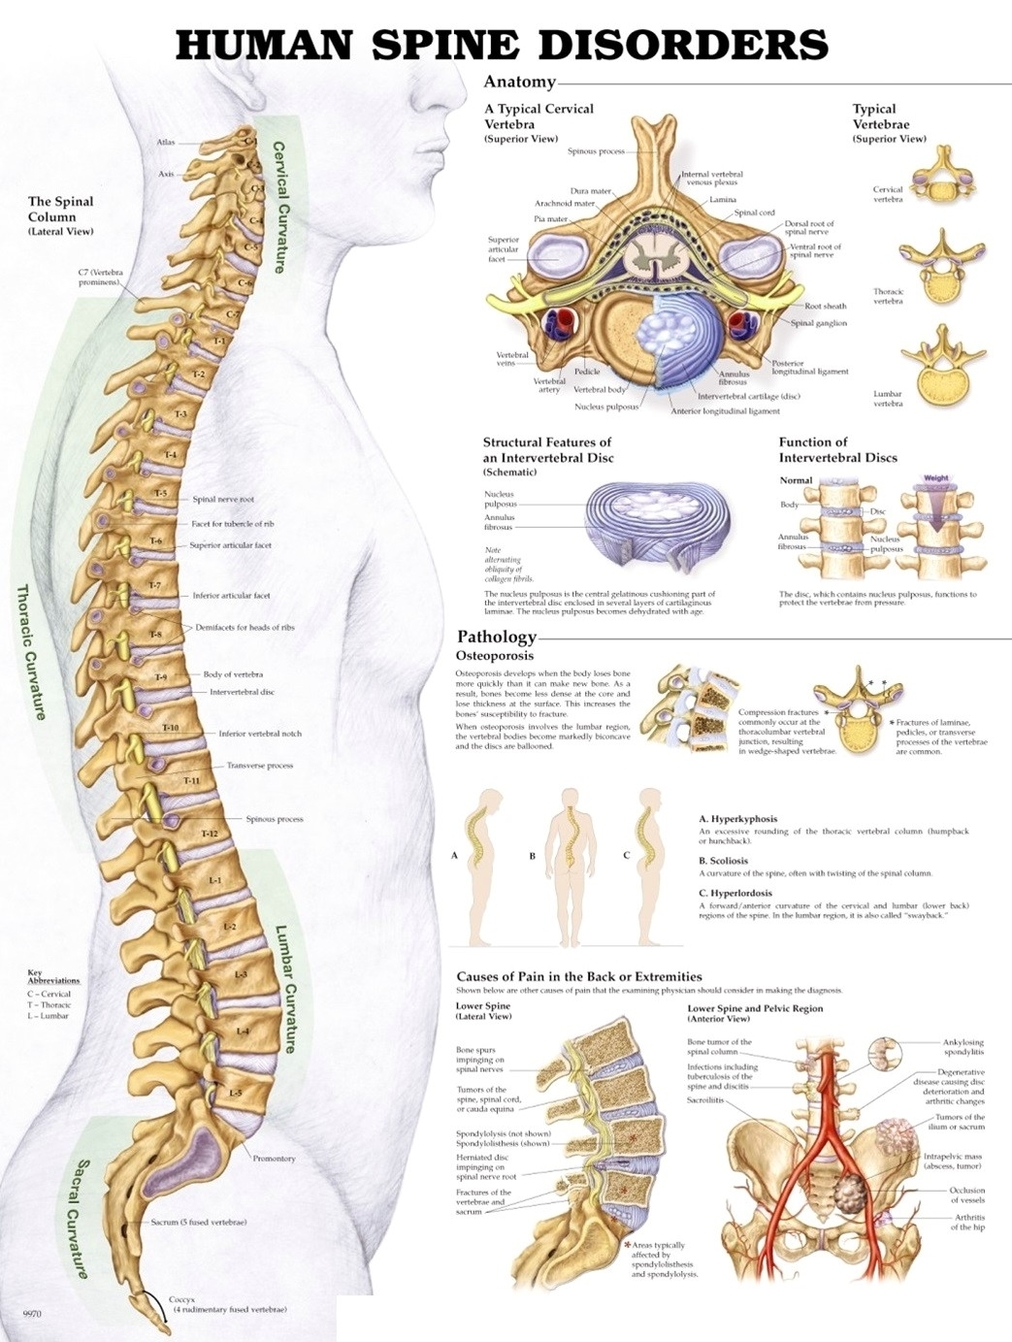 Spine disorders diagram